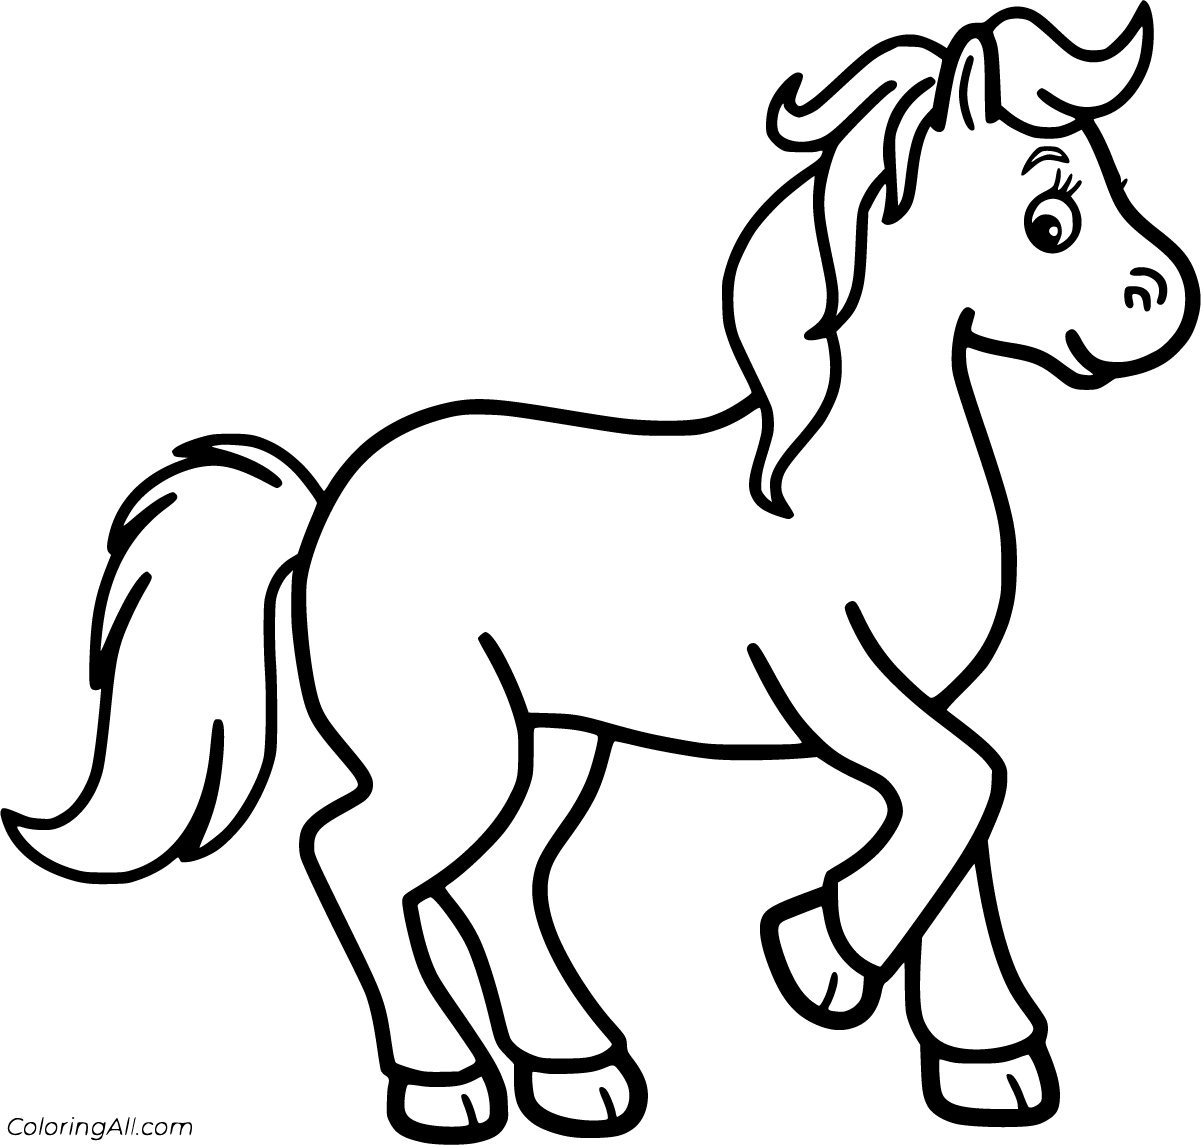 Horse Coloring Pages - ColoringAll